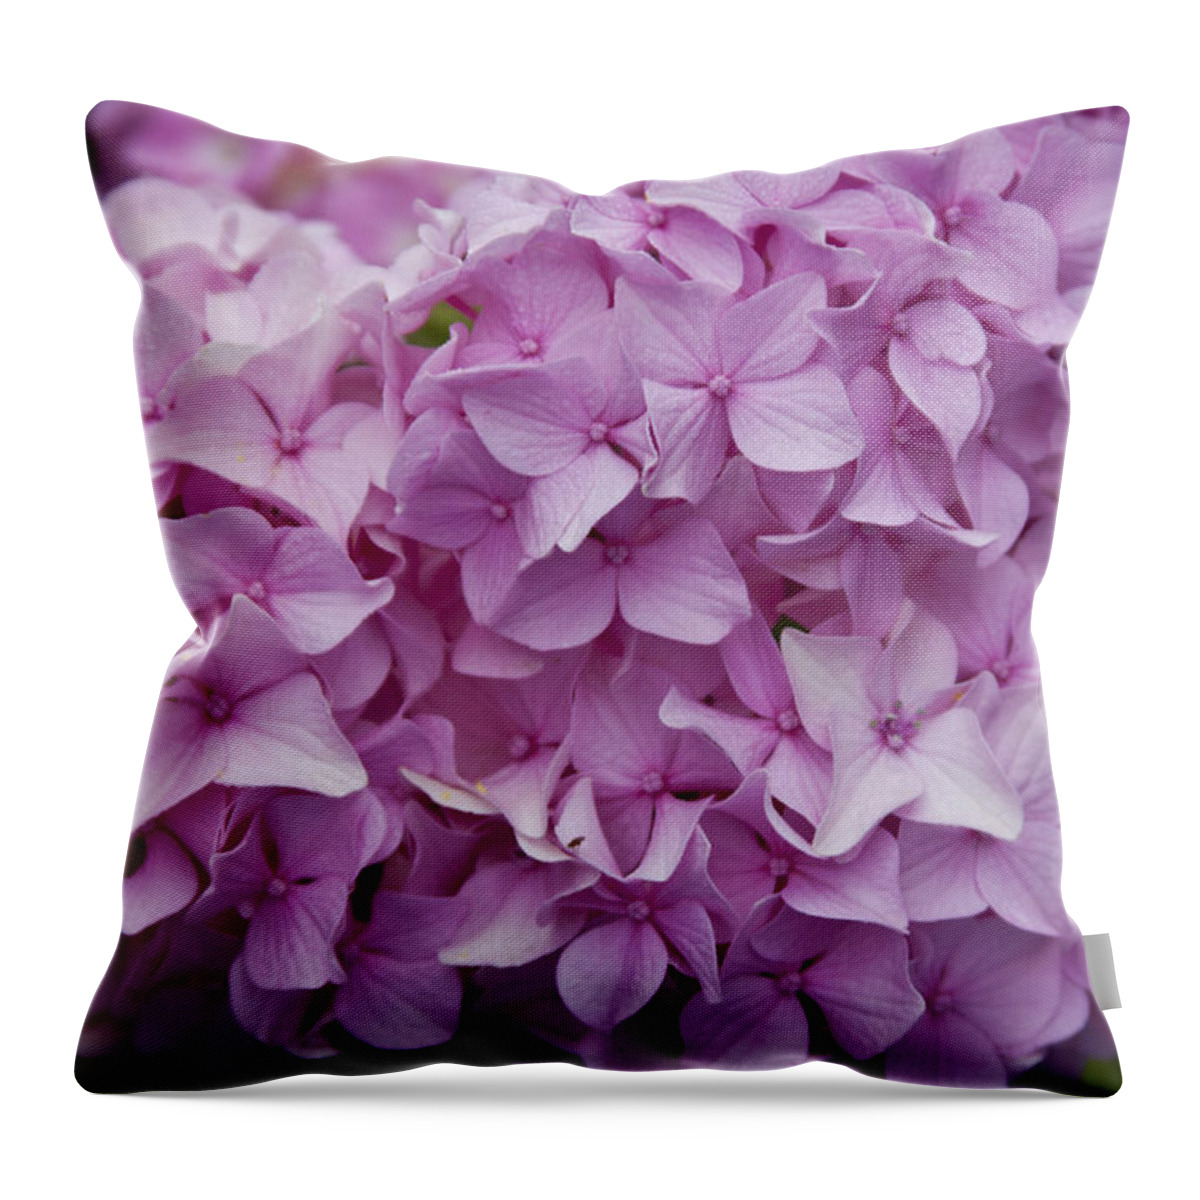 Flowers Throw Pillow featuring the photograph Pink Hydrangea by Jean Macaluso